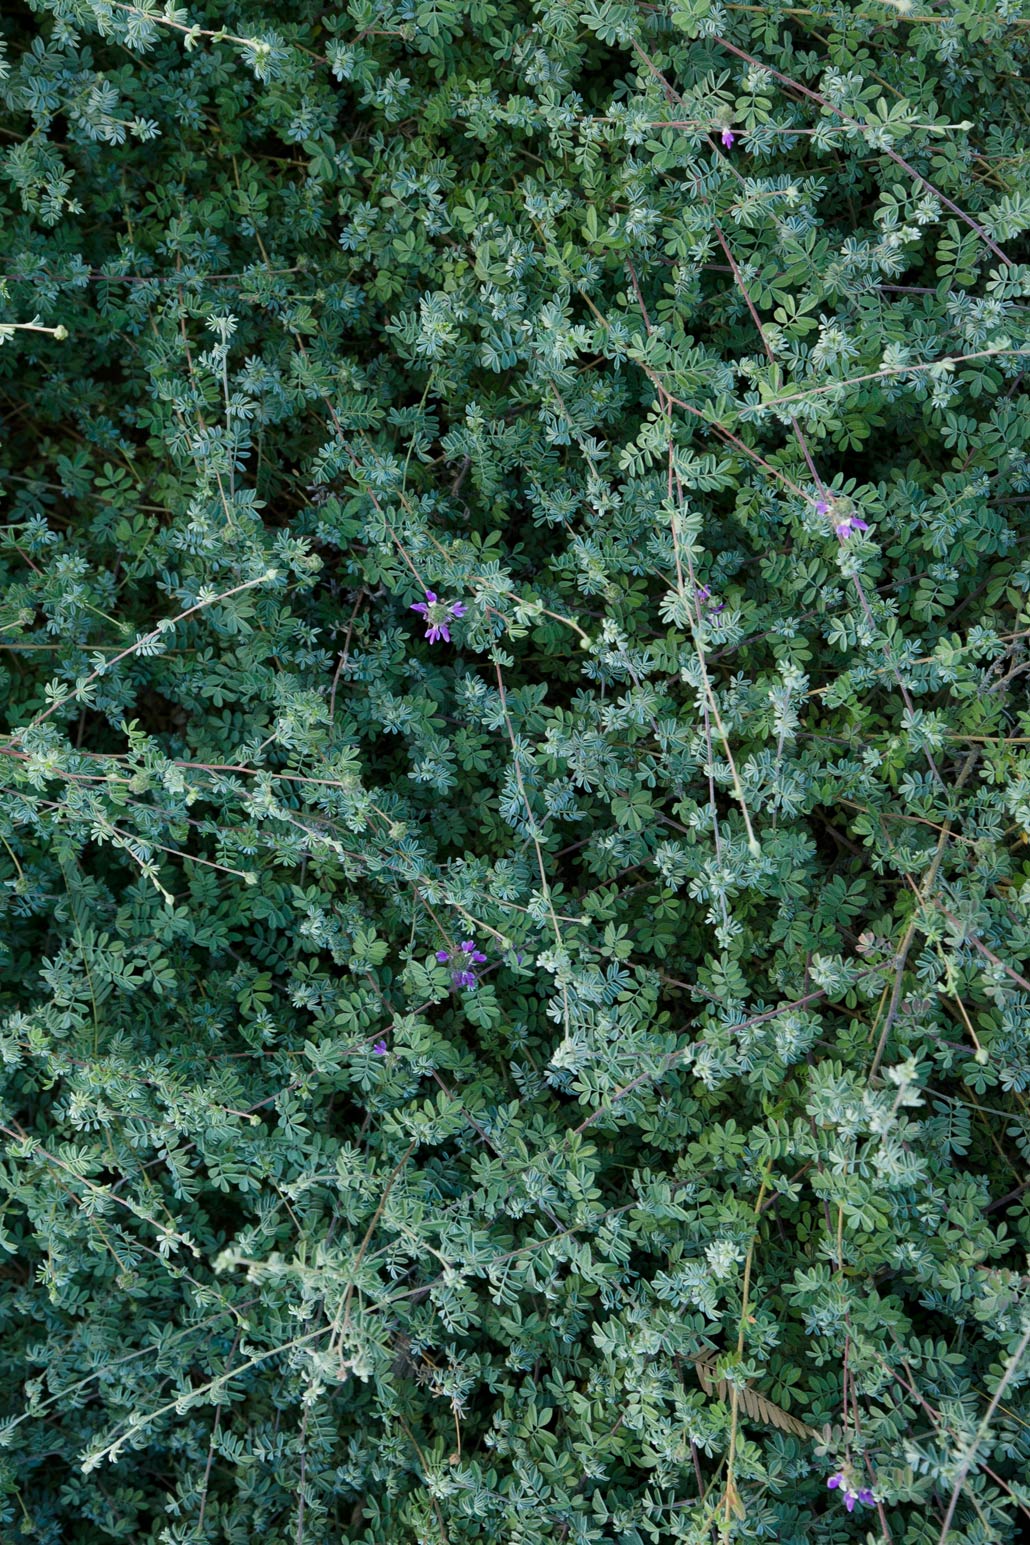 A close-up view of the silver-green leaves of the Trailing Smokebush.